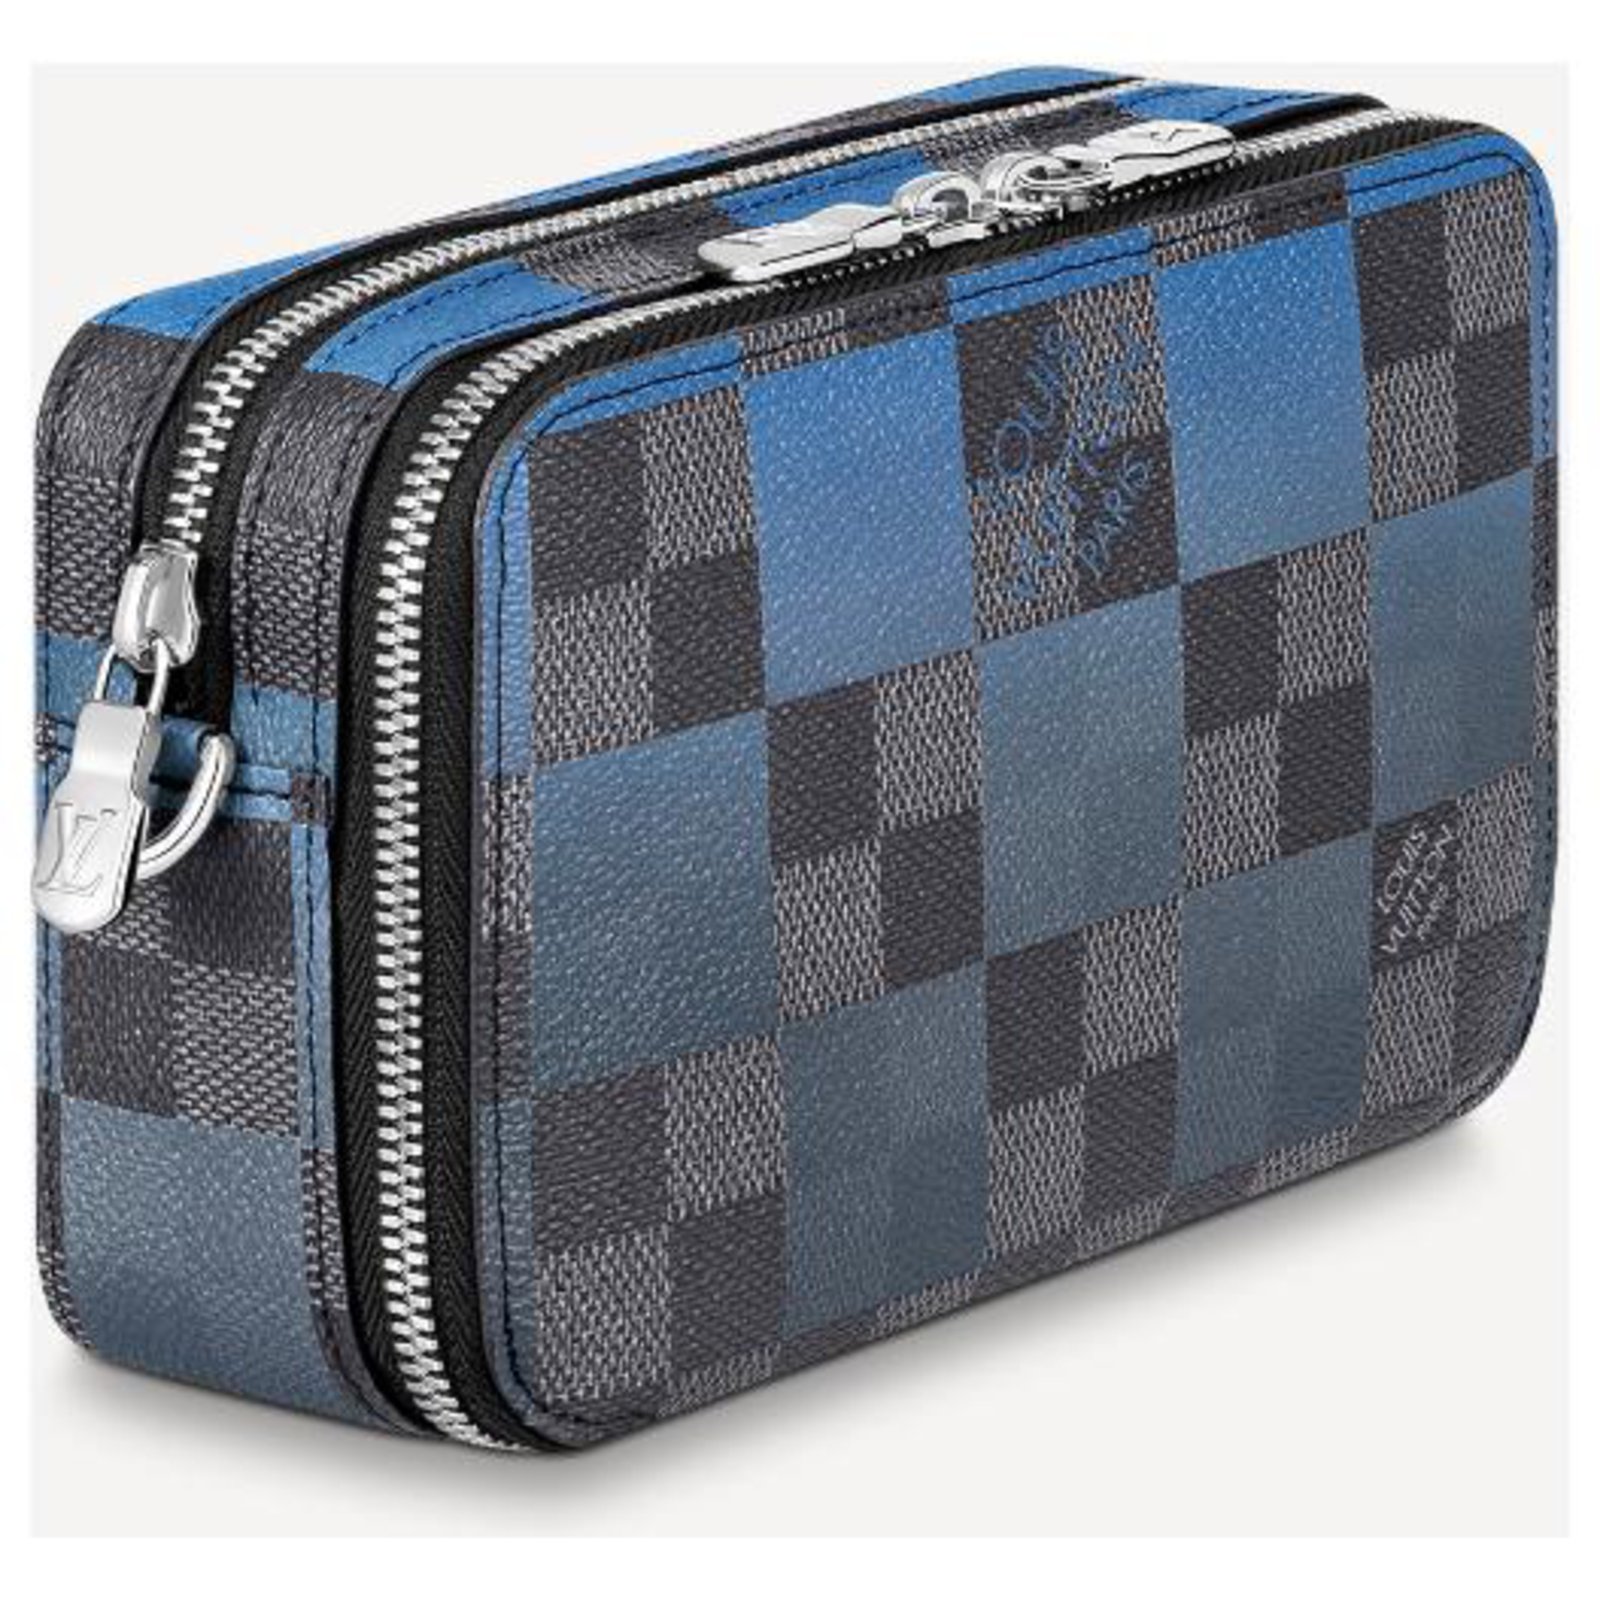 Louis Vuitton Alpha wearable wallet bag in blue and graphite